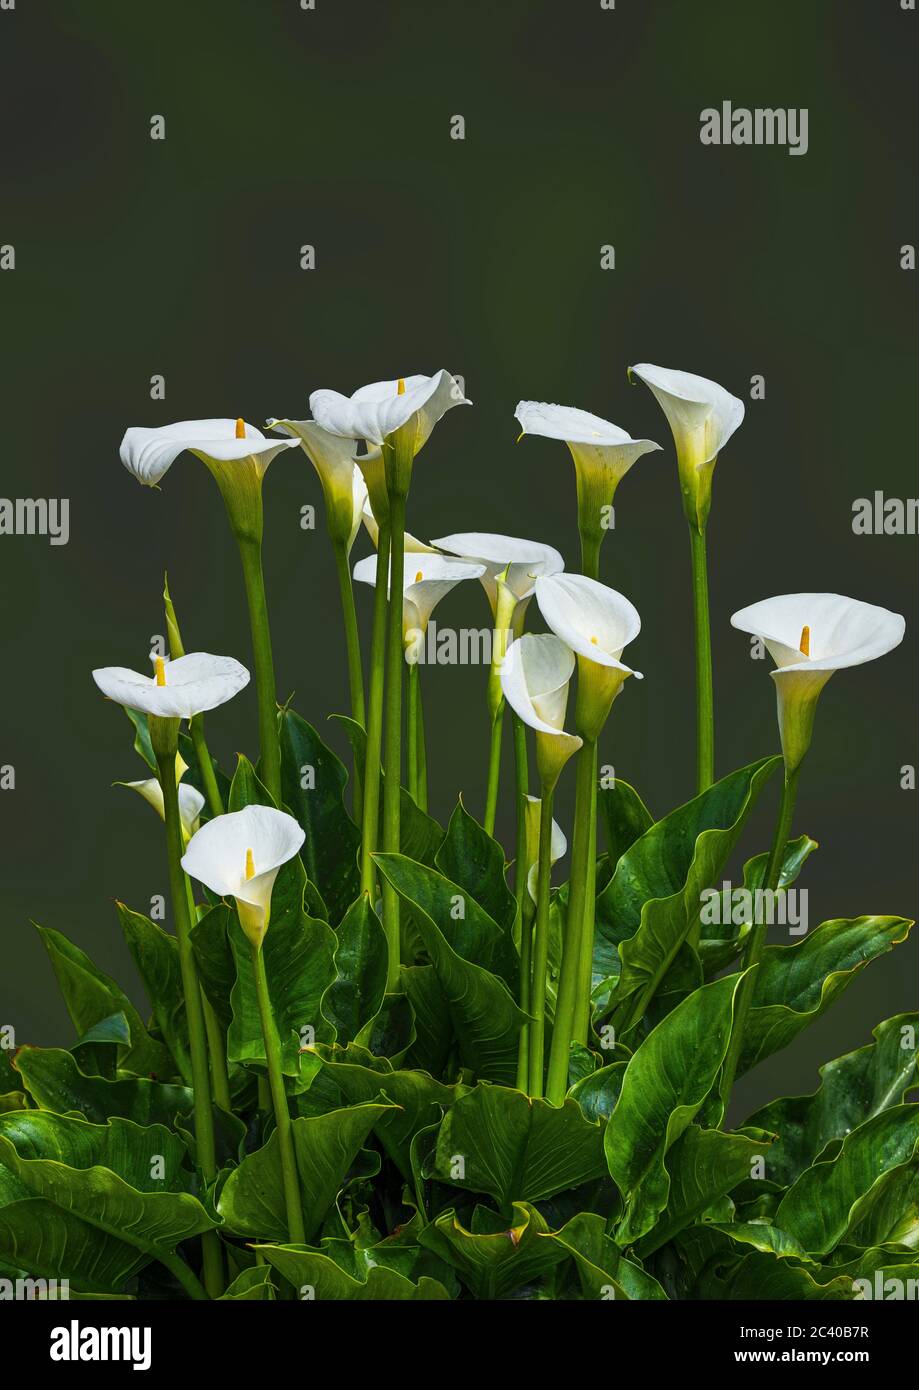 A Calla Lily in full flower. Stock Photo